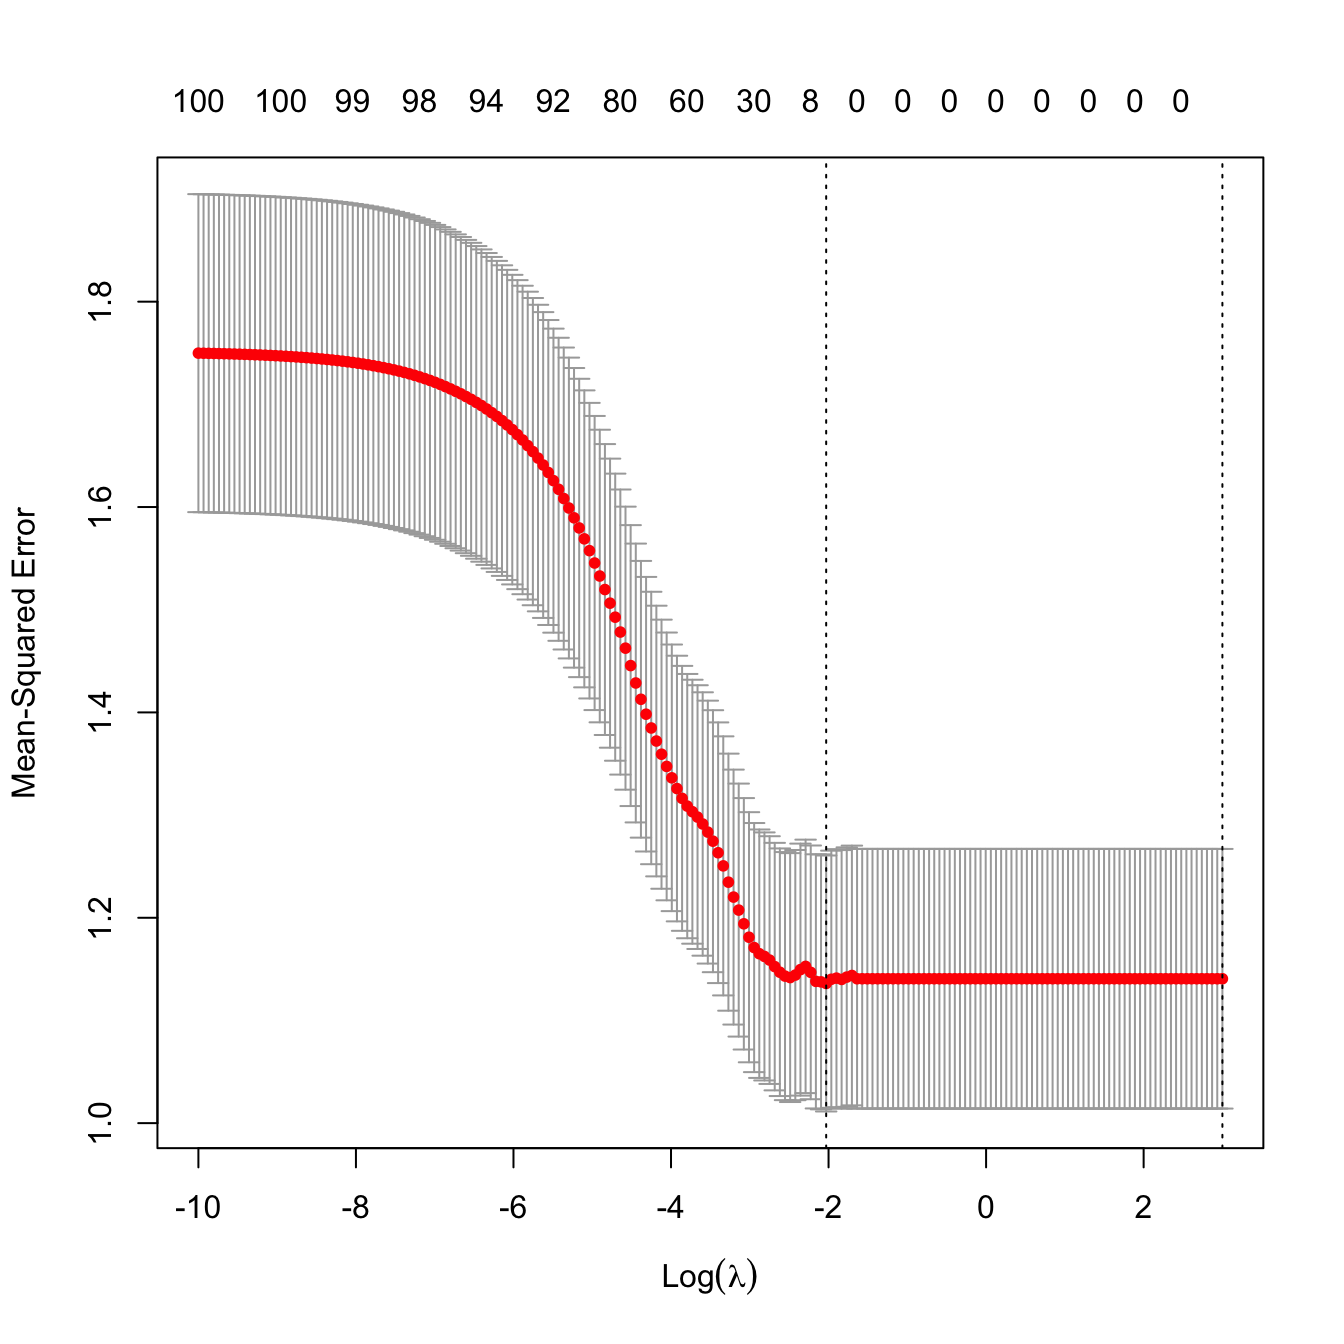 “L”-shaped form of a cross-validation curve with unrelated response and predictors.